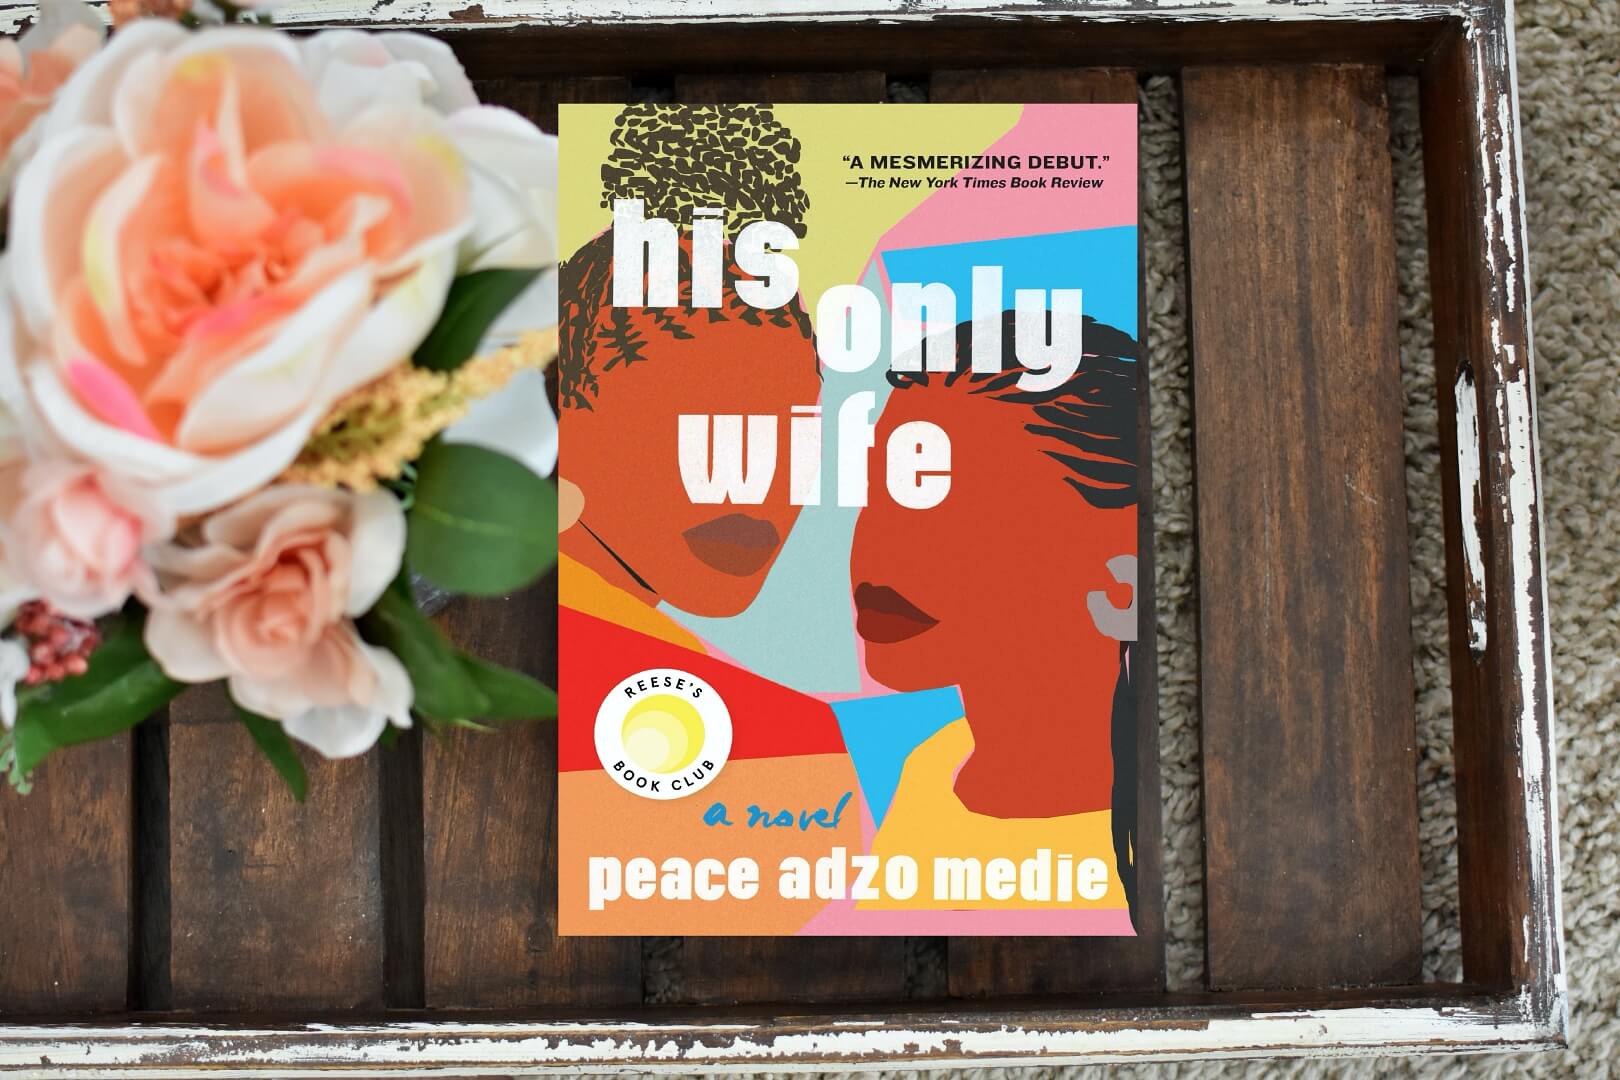 Book Club Questions for His Only Wife by Peace Adzo Medie